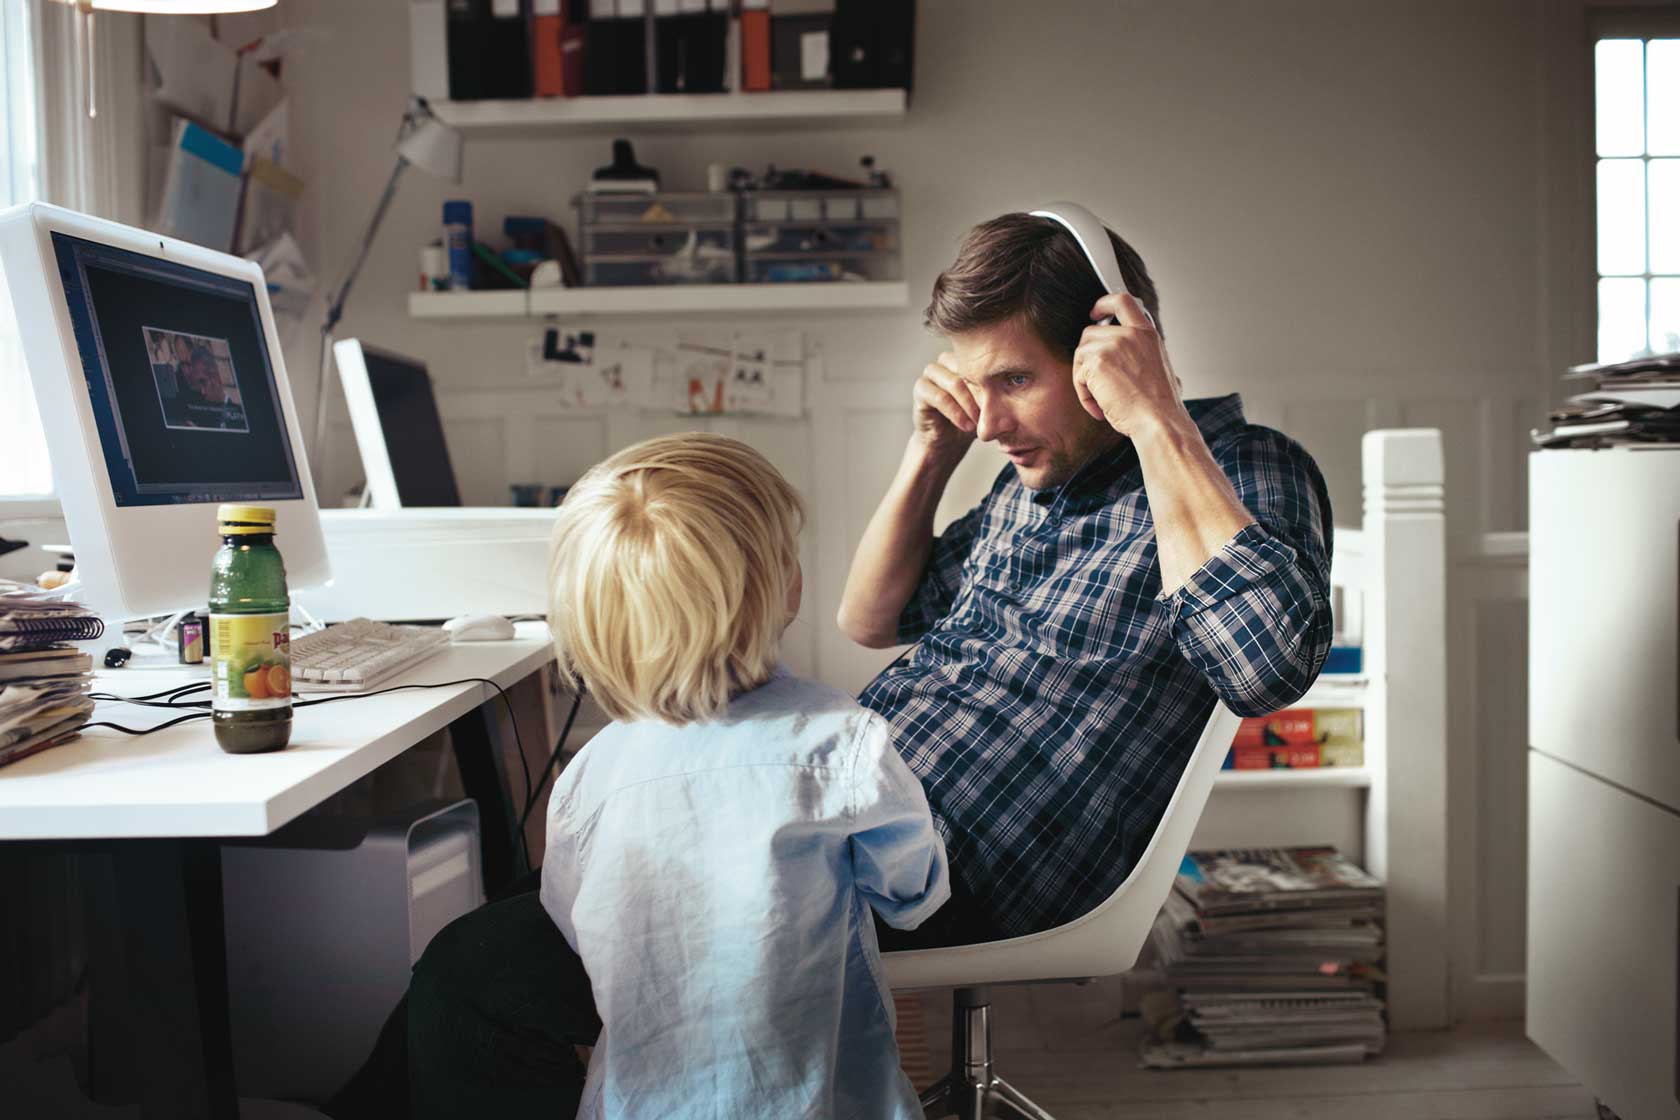 Child stands in front of father - father takes off headphones